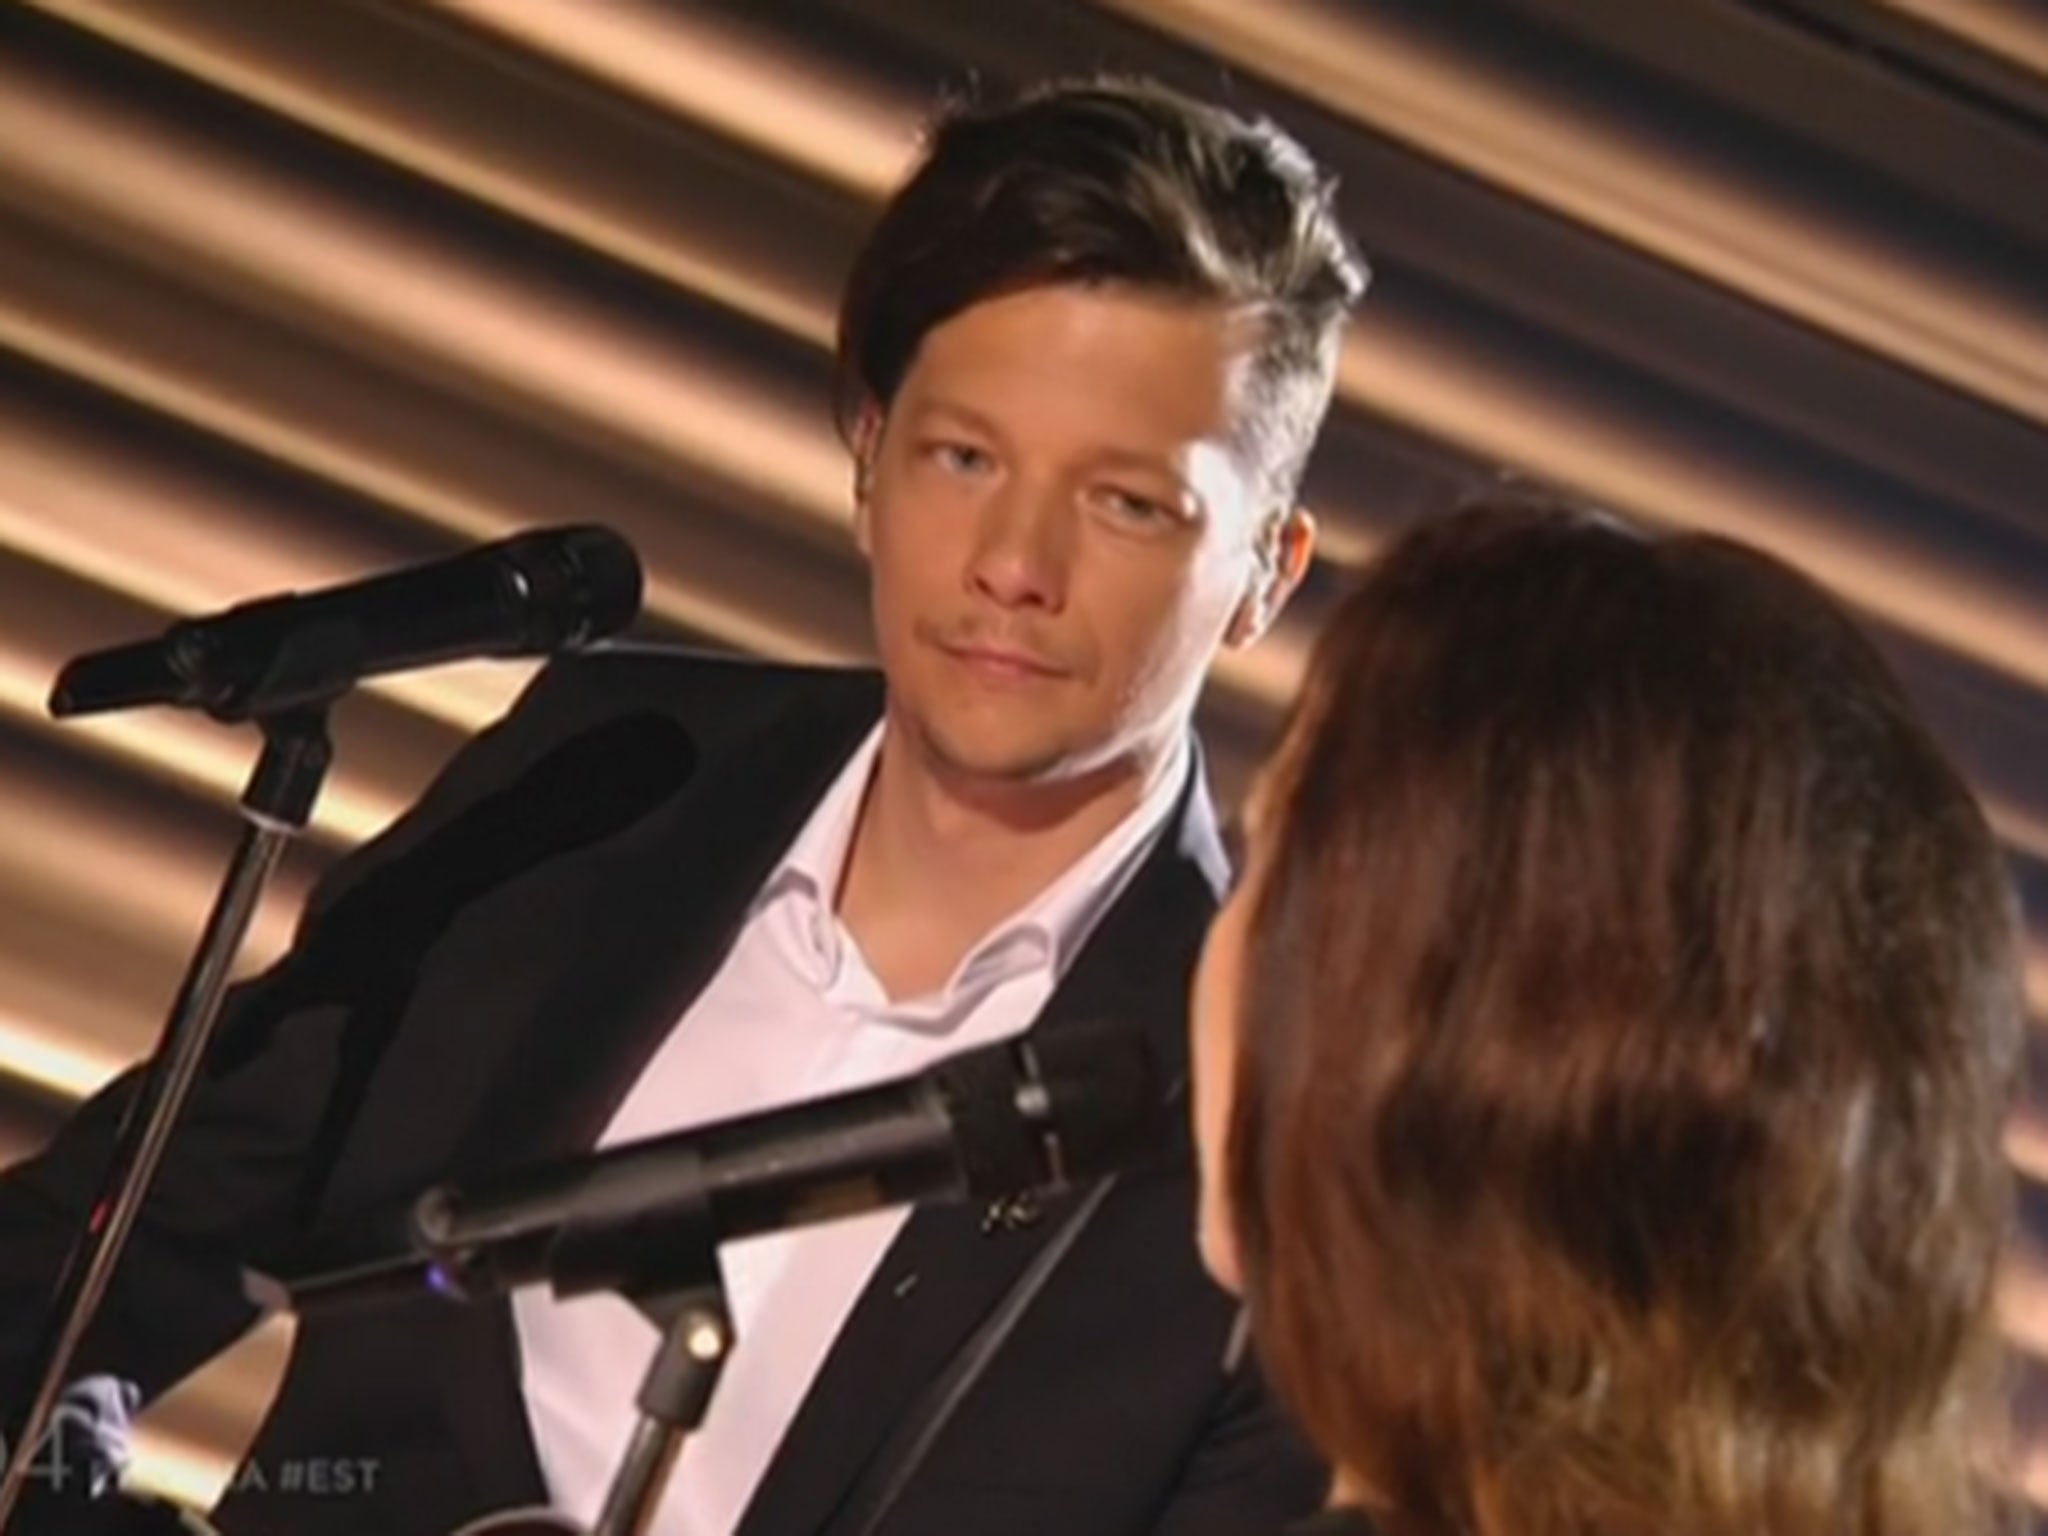 Louis Tomlinson look-a-like Stig Rasta singing for Estonia in the Eurovision Song Contest